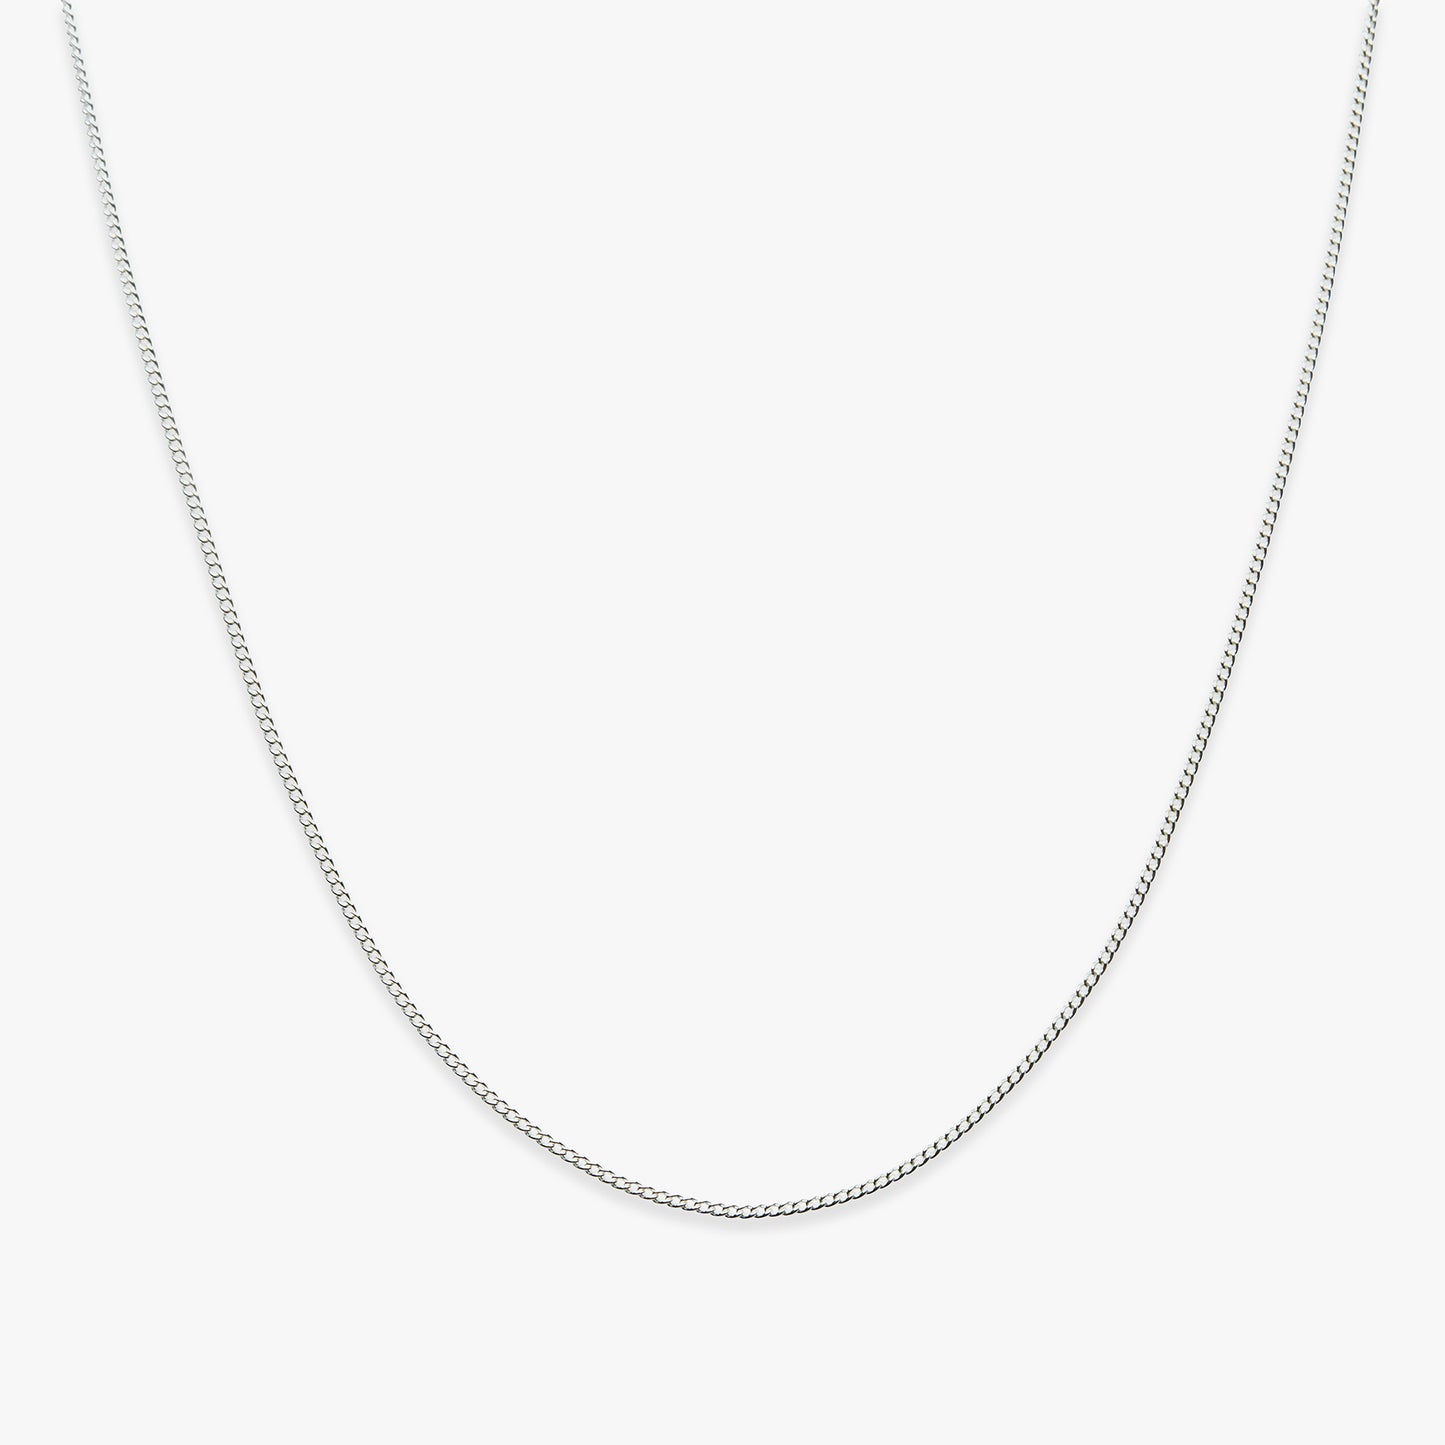 Basic curb chain ketting zilver